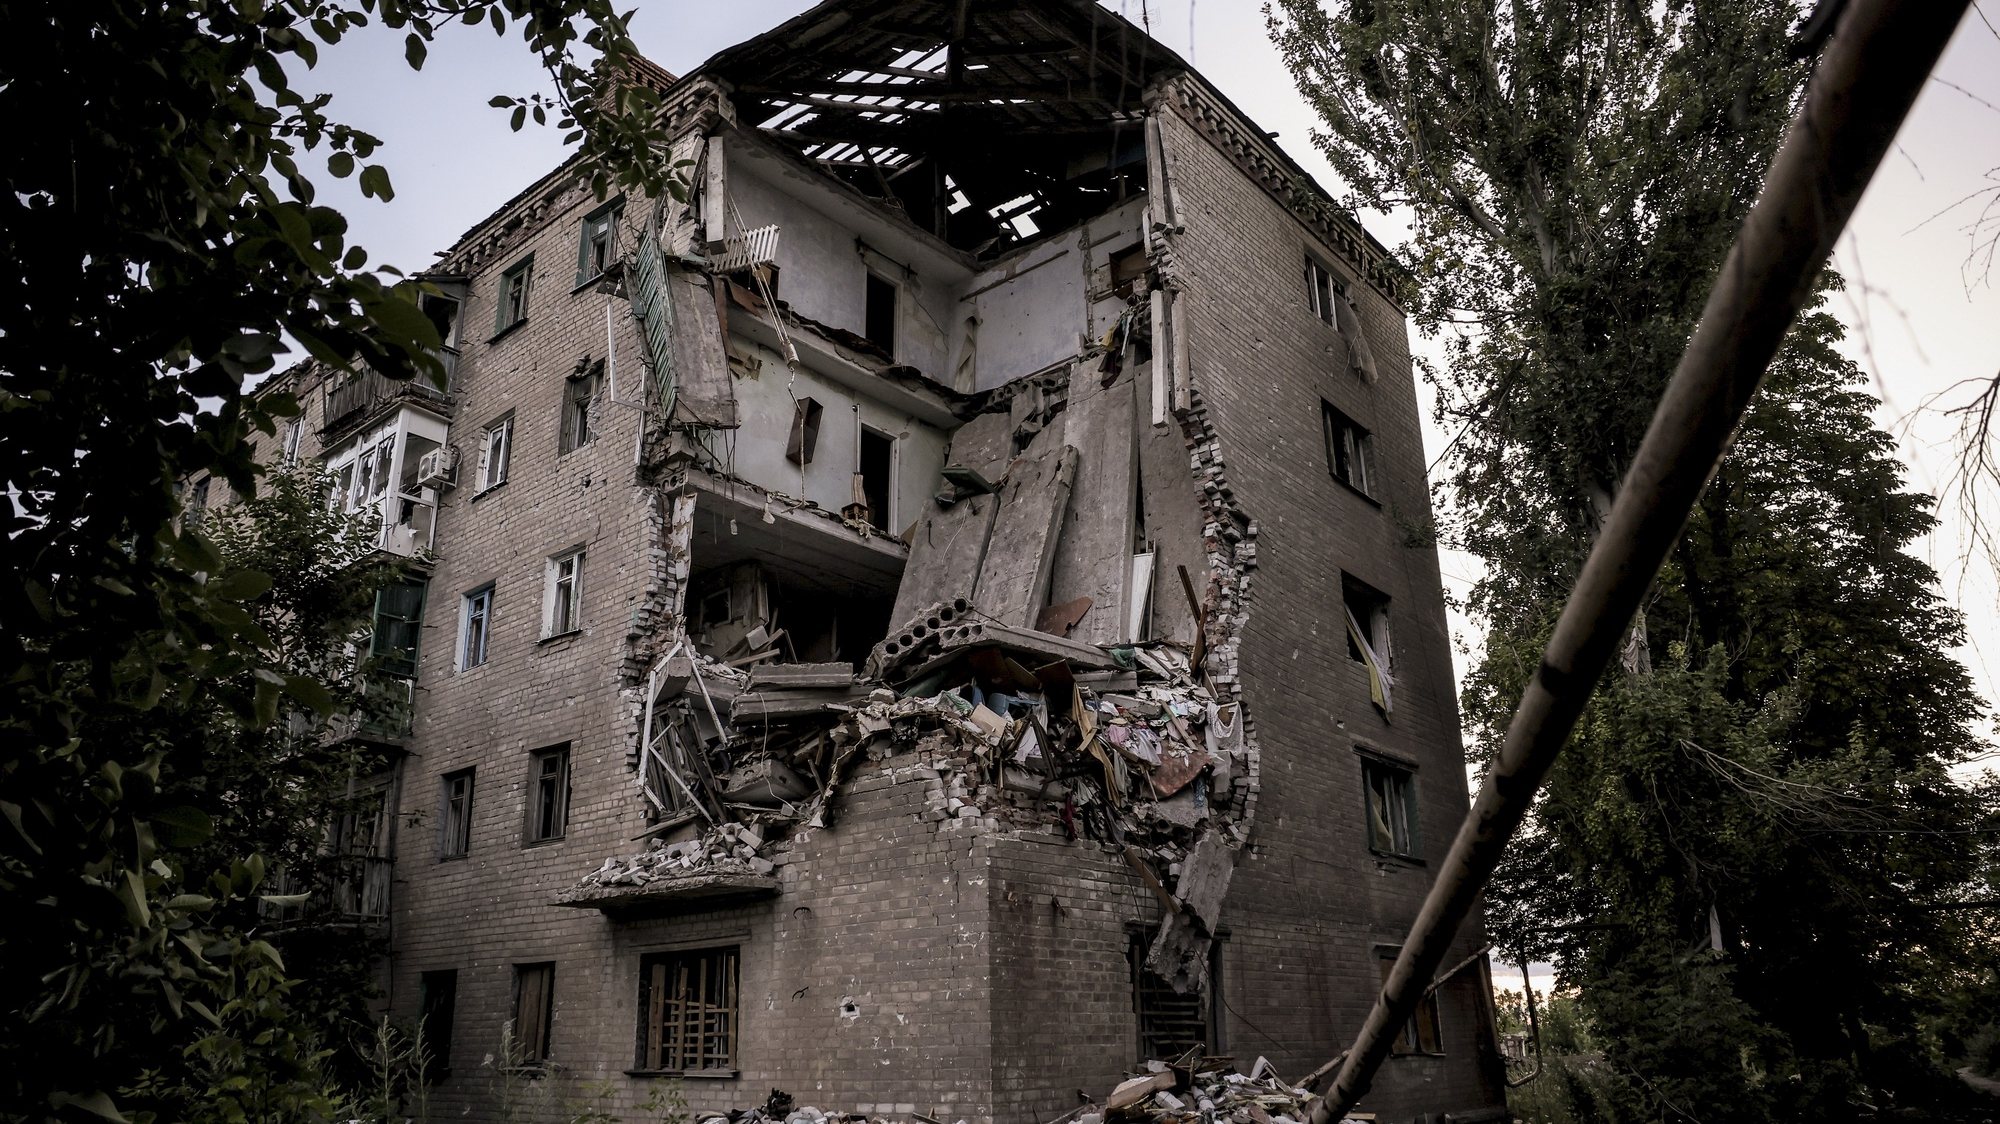 epa11436457 A handout photo made available by the Ukrainian Army shows a residential building damaged by shelling in the city of Chasiv Yar, Ukraine, 25 June 2024 amid the Russian invasion. Russian troops entered Ukrainian territory on 24 February 2022, starting a conflict that has provoked destruction and a humanitarian crisis.  EPA/UKRAINIAN ARMY / OLEG PETRASIUK  / HANDOUT  HANDOUT EDITORIAL USE ONLY/NO SALES HANDOUT EDITORIAL USE ONLY/NO SALES